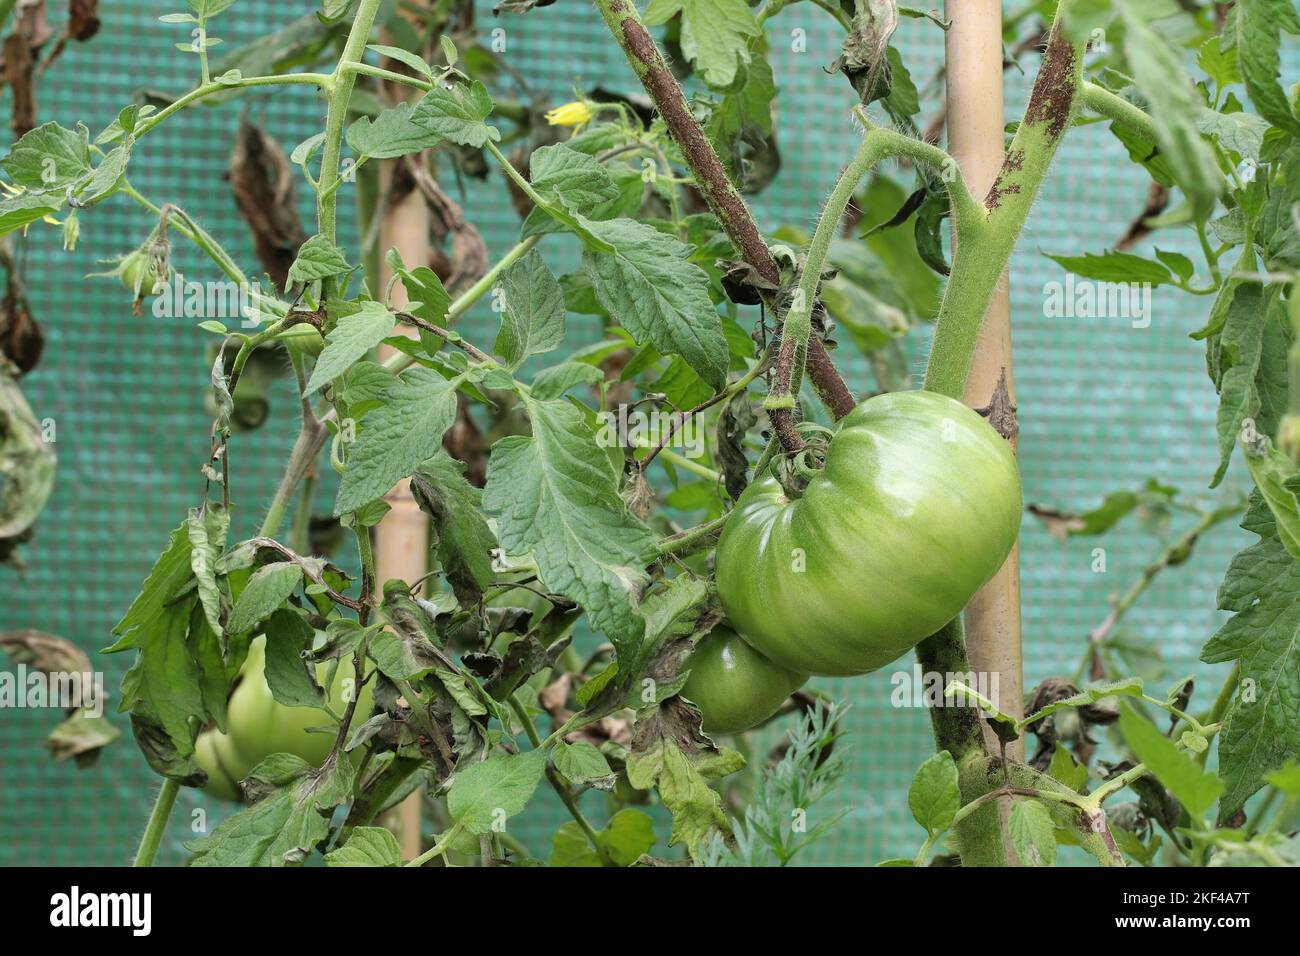 The tomato plant is infected with late blight caused by fungus-like microorganism Phytophthora infestans. Stems and leaves have dark brown spots. Stock Photo